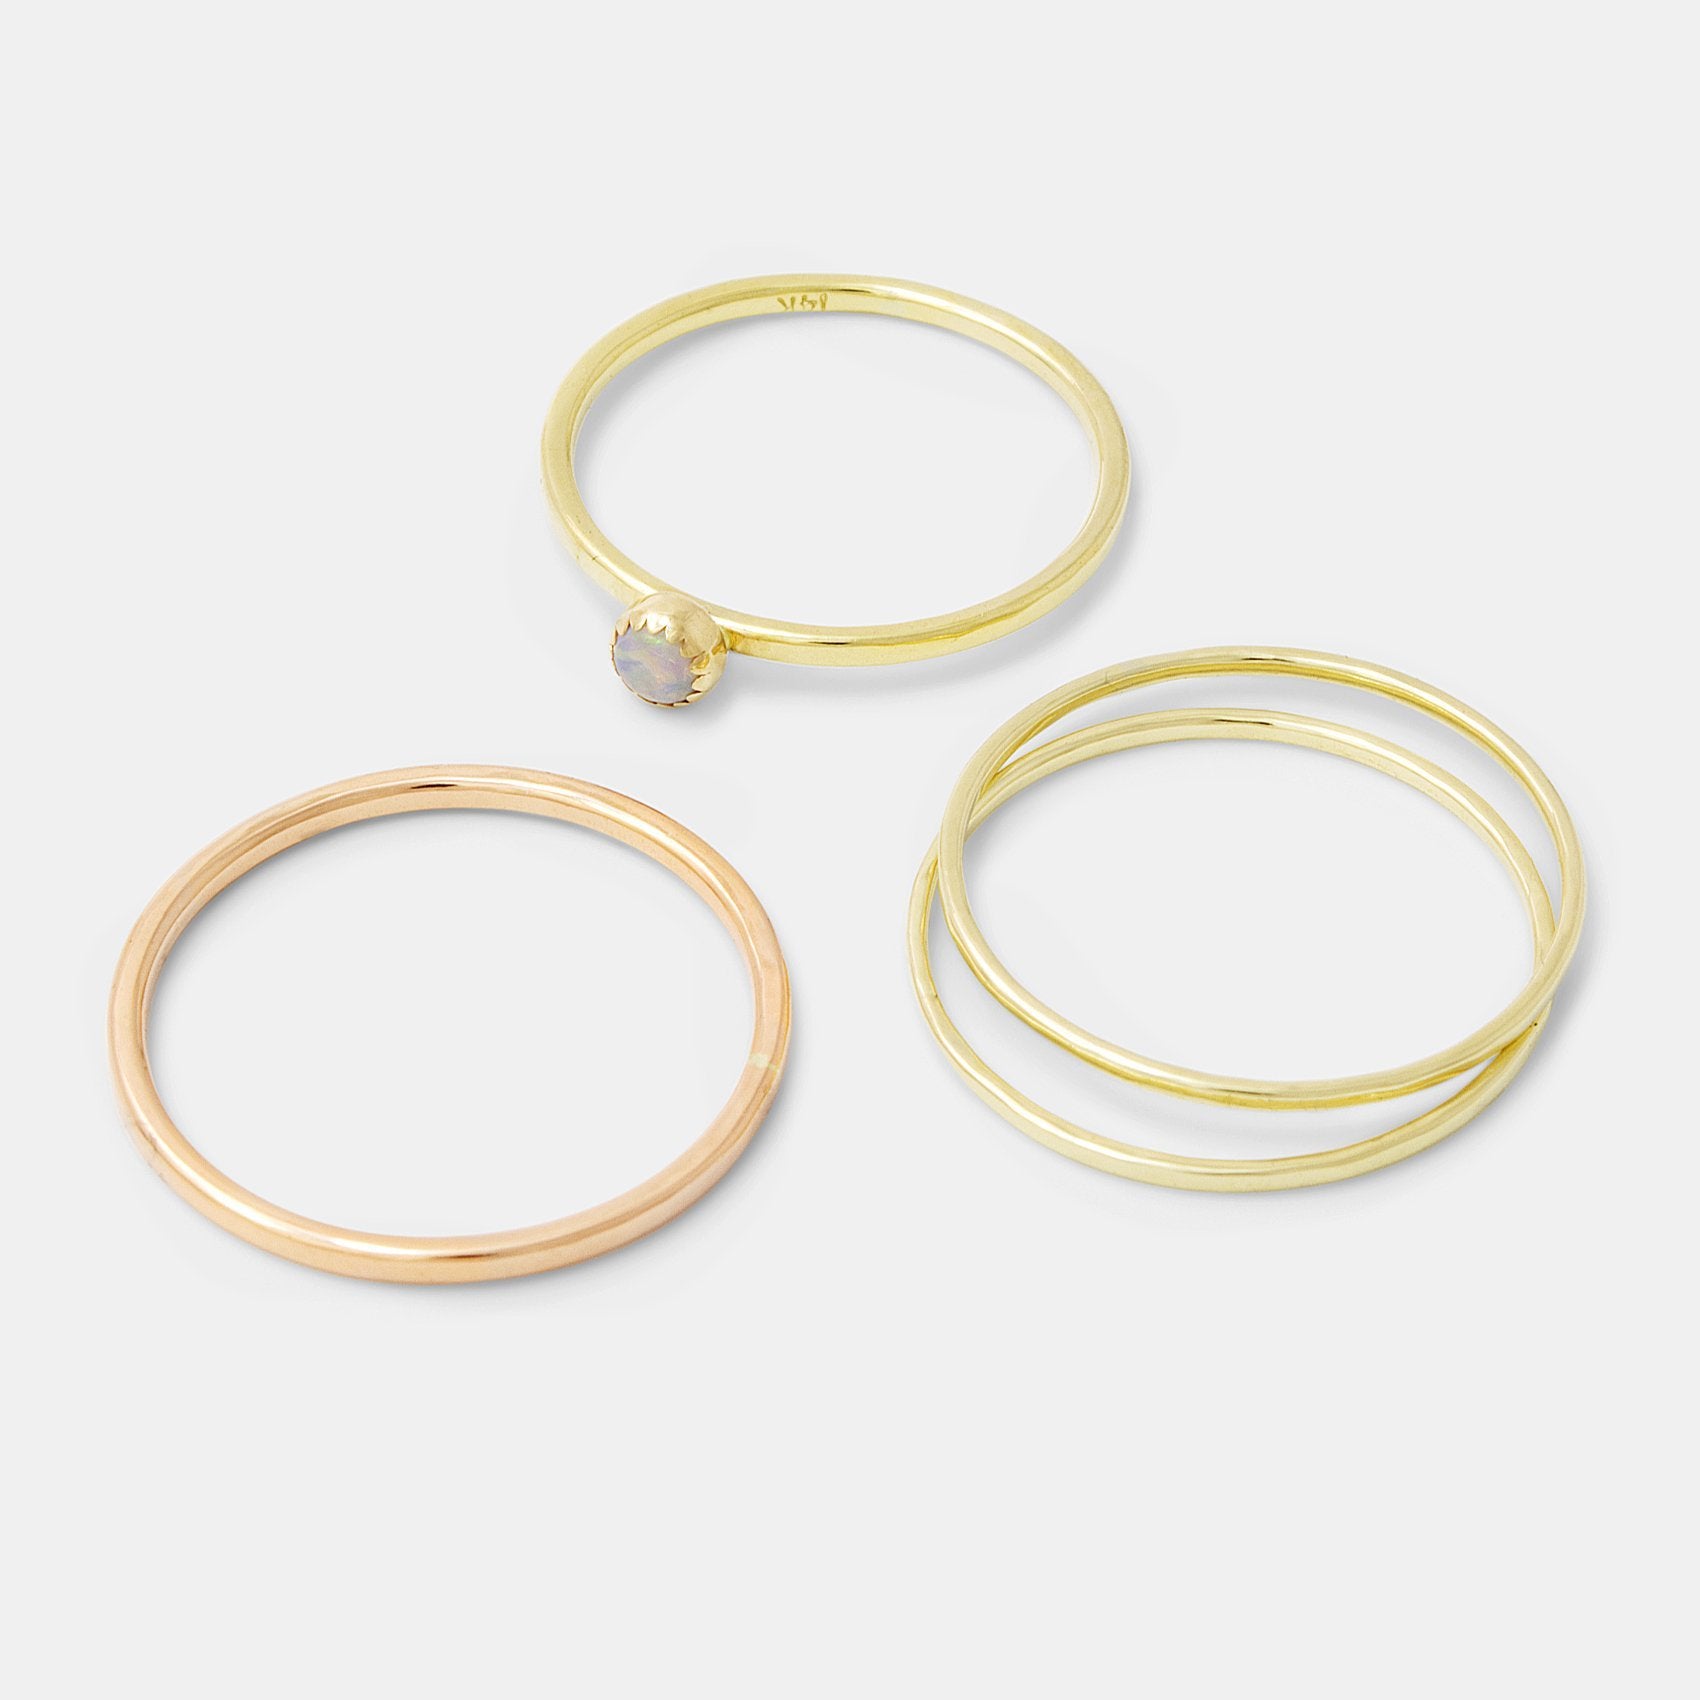 Opal & solid gold stacking ring - Simone Walsh Jewellery Australia